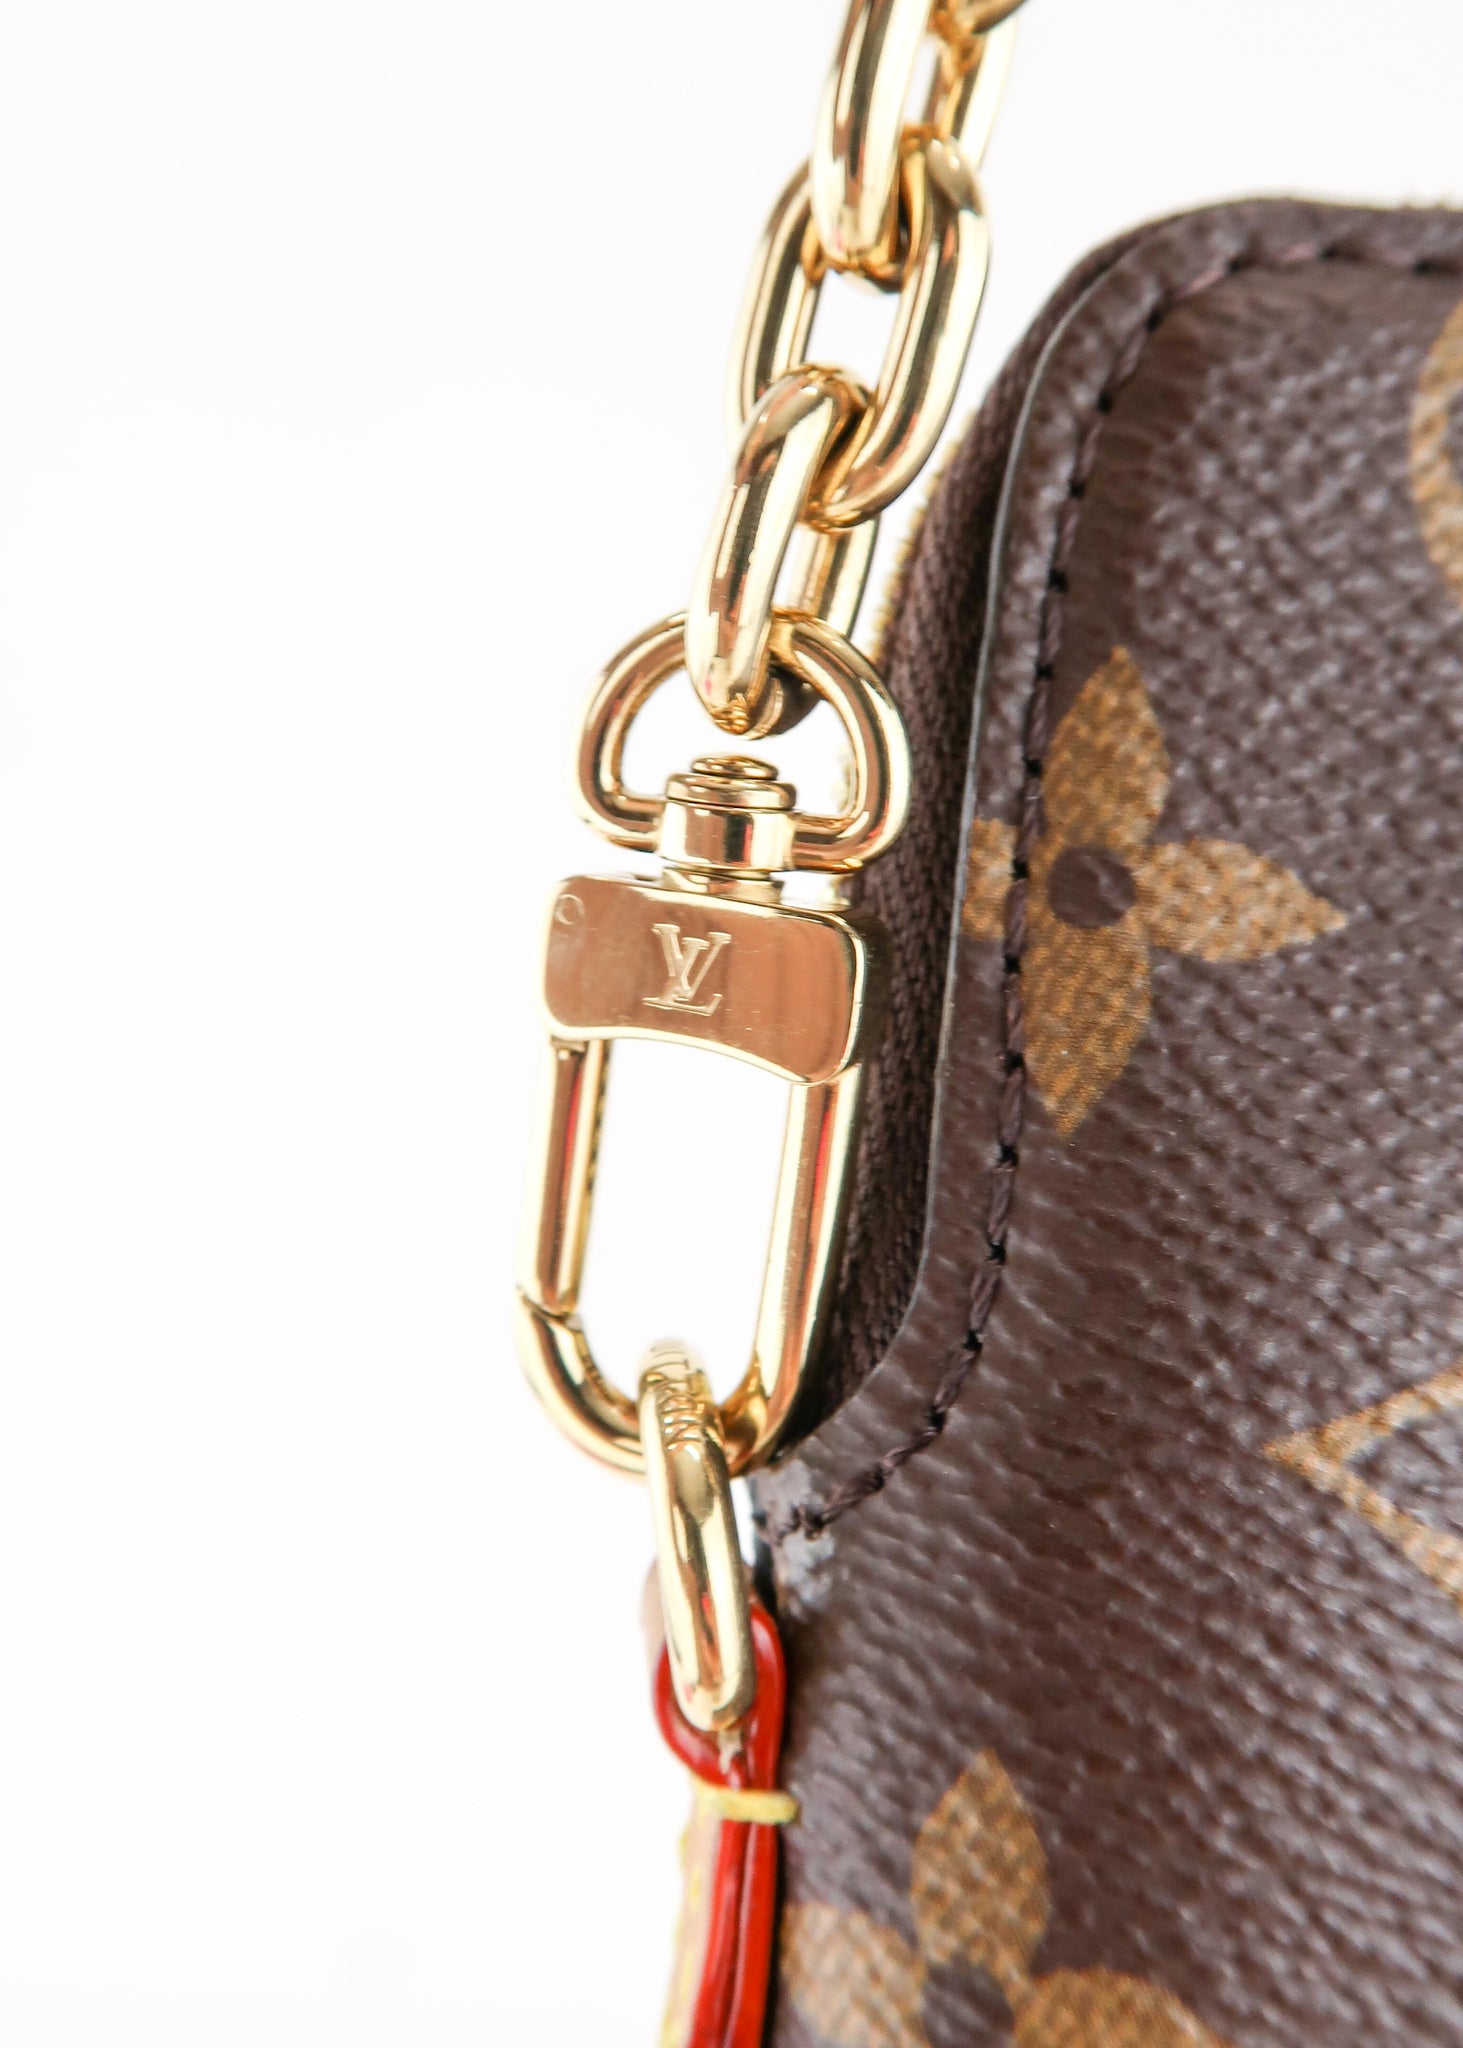 How long is the gold chain on the louis vuitton utility phone